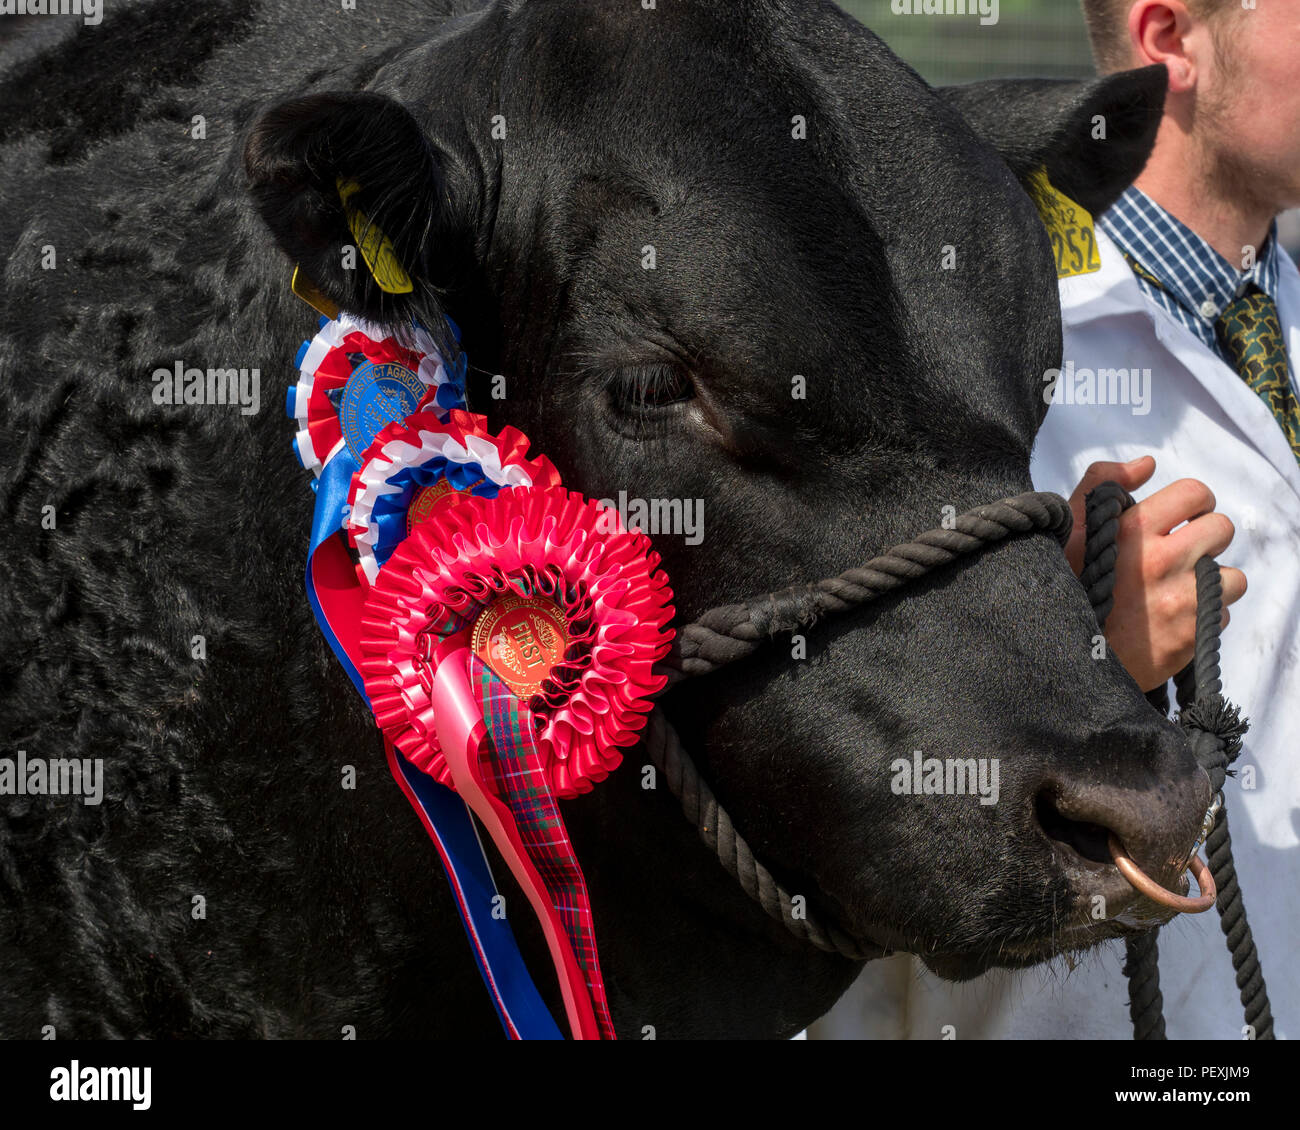 Turriff, Scotland - 06 Aug 2018: Champion Aberdeen Angus Bull at the Turriff Agricultural Show Stock Photo